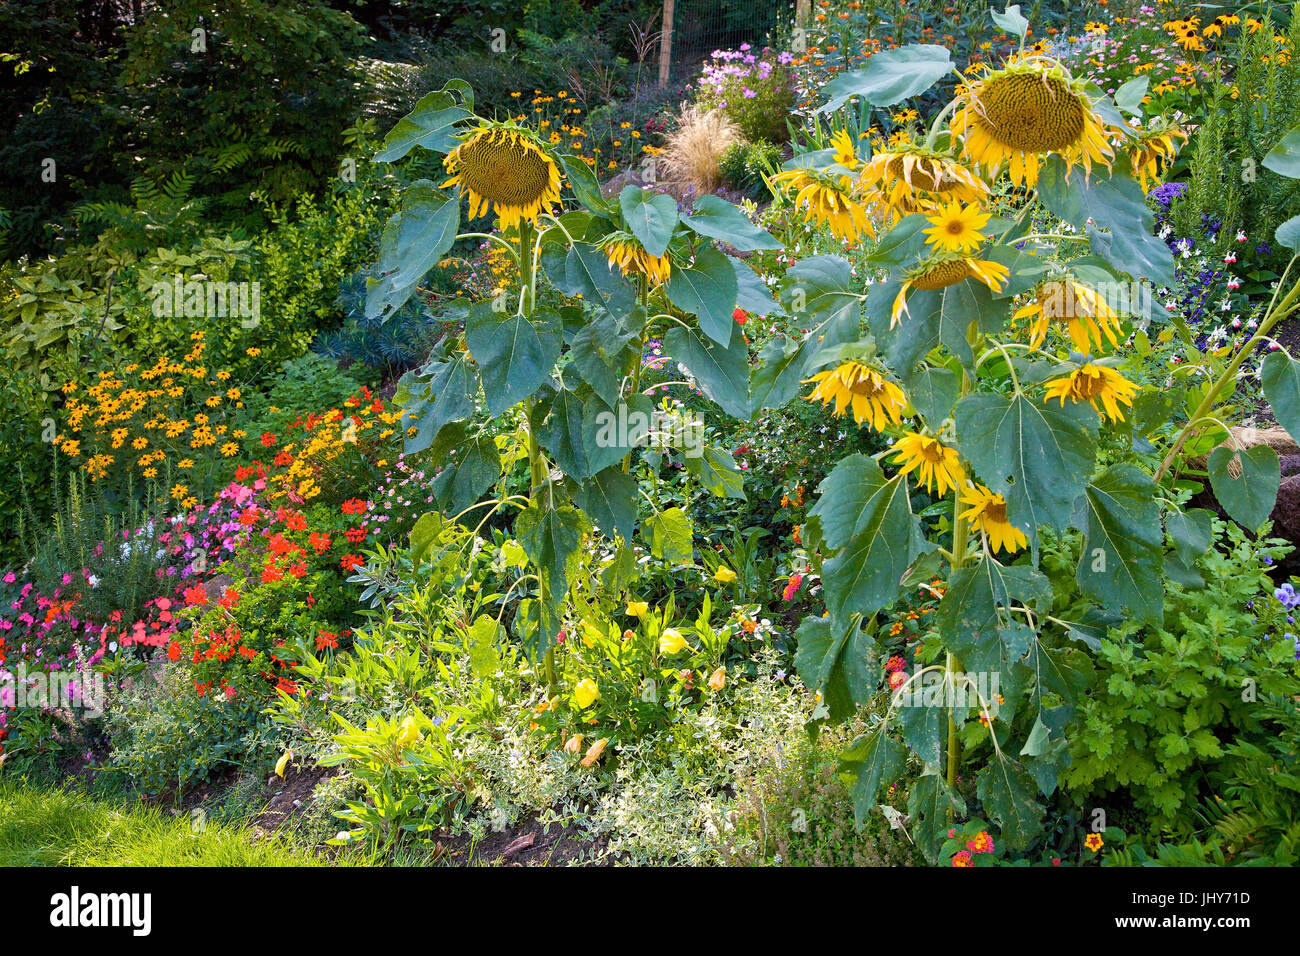 Sunflowers in the garden - guards with sunflowers, Sonnenblumen im Garten - Garden with sunflowers Stock Photo